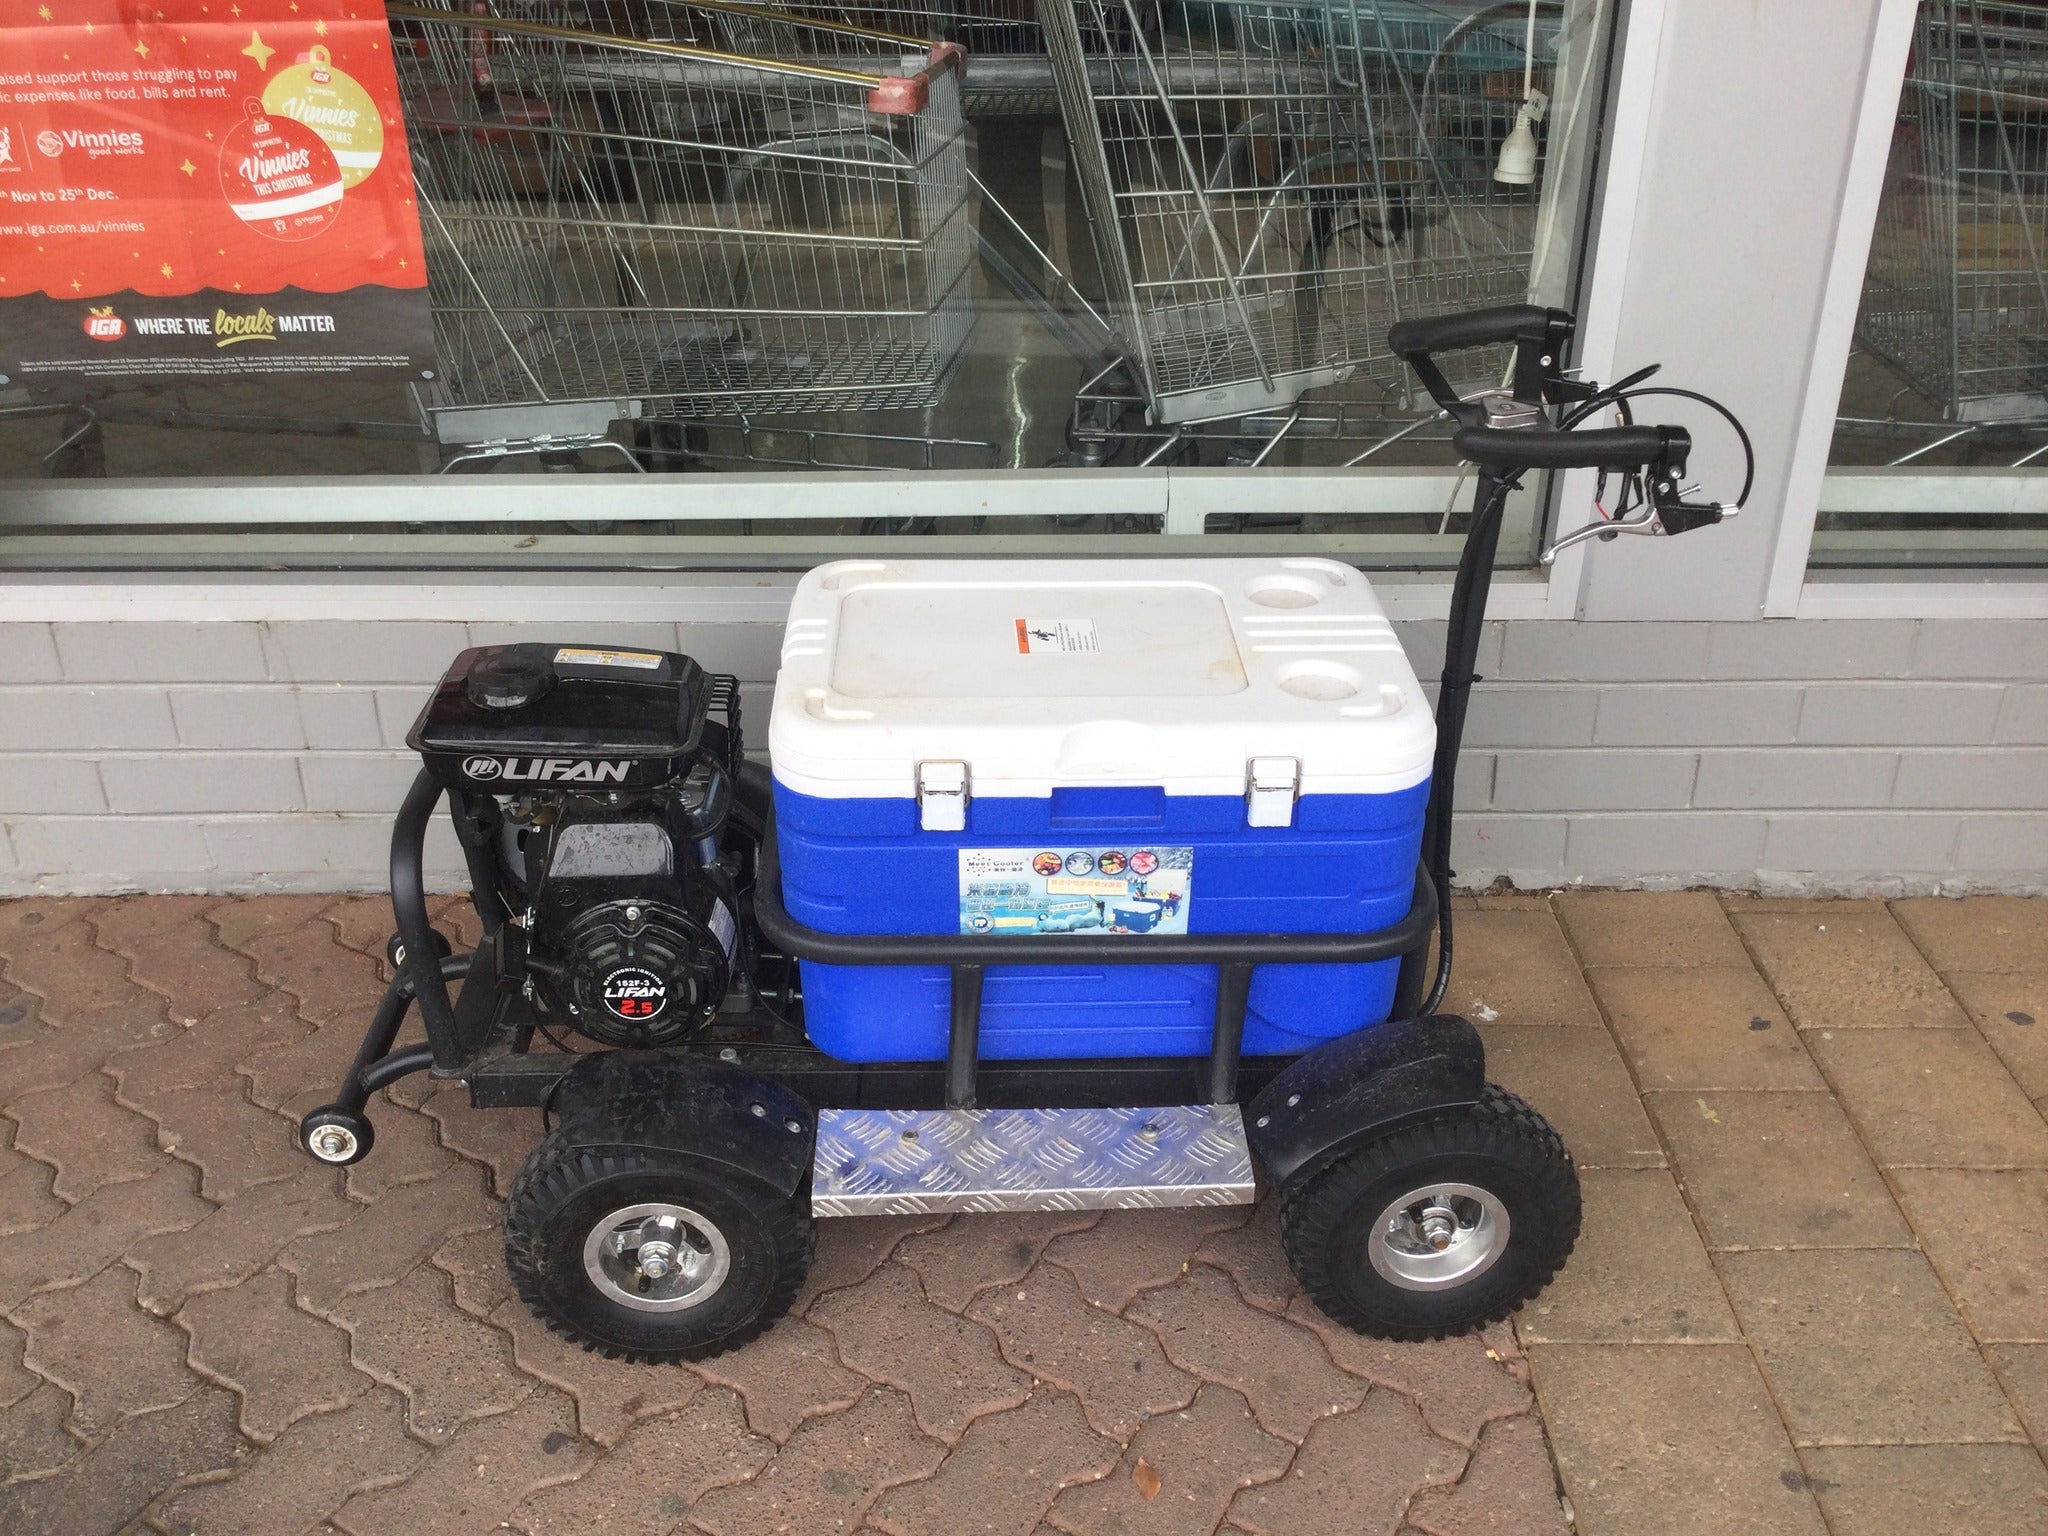 Australian Cops Pulled Over A Dude On A Motorized Cooler And Impounded It